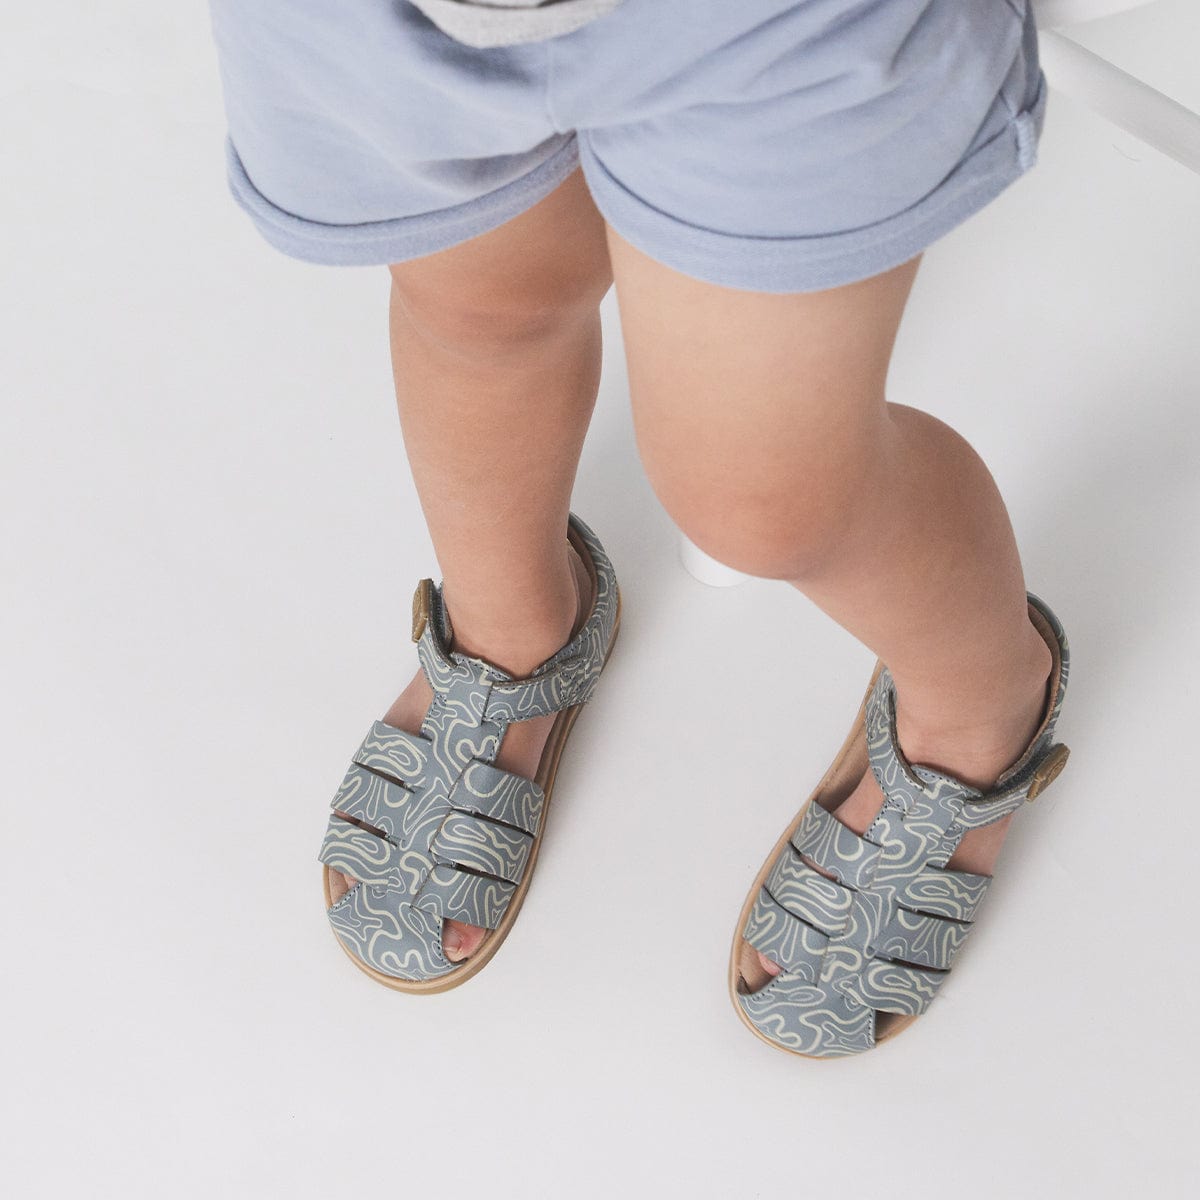 Pretty Brave Boys Shoes Rocco Sandal in Blue Ripple